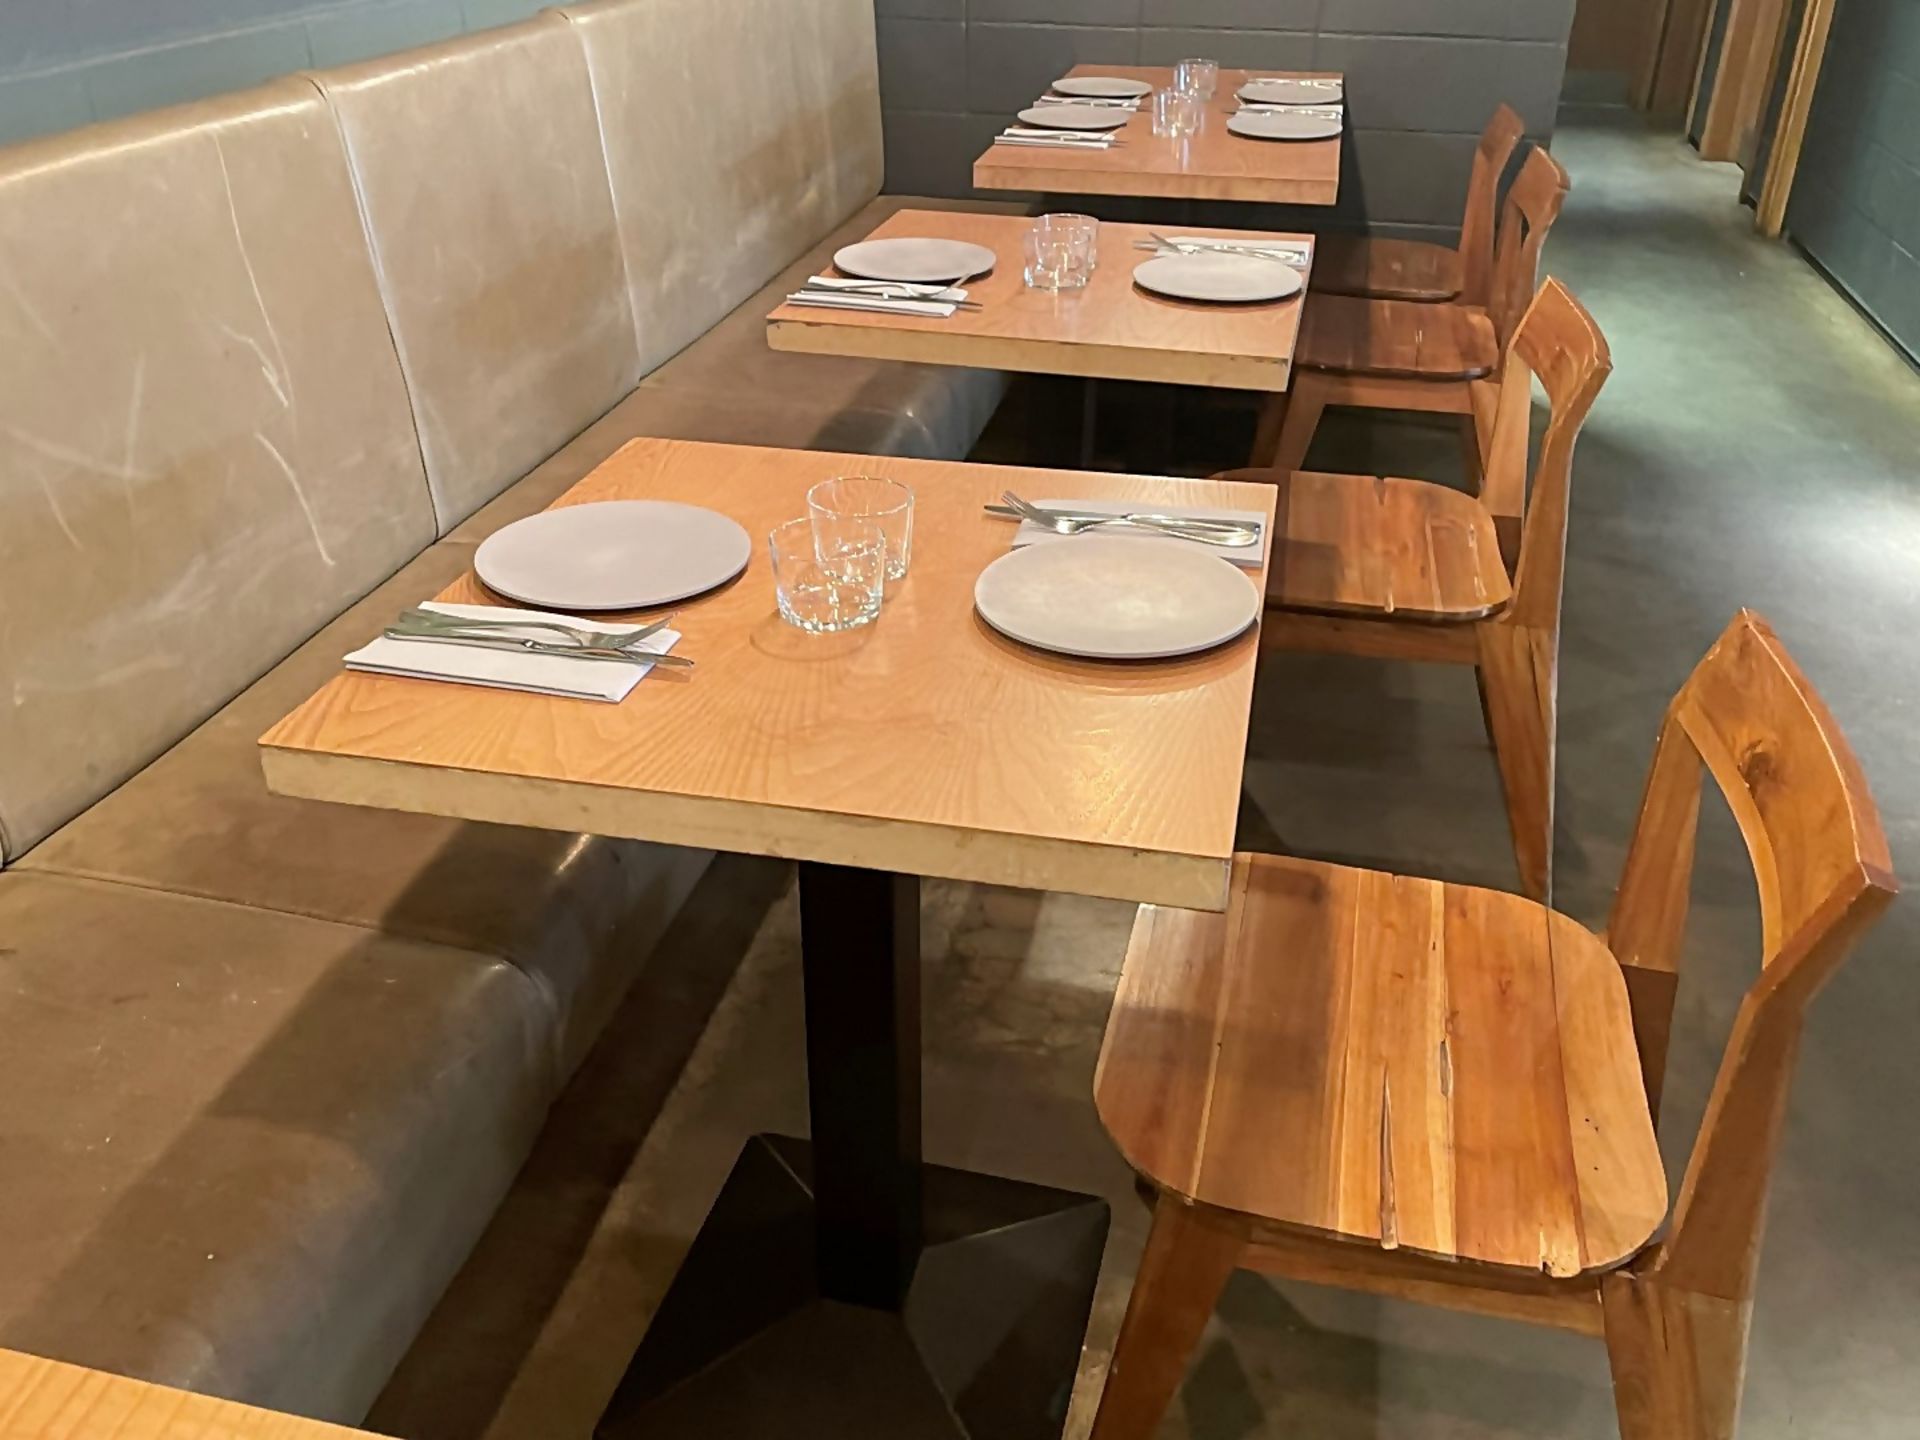 4 x Square Bistro Tables Featuring Wooden Tops And Sturdy Metal Bases - Dimensions To Follow - - Image 5 of 5